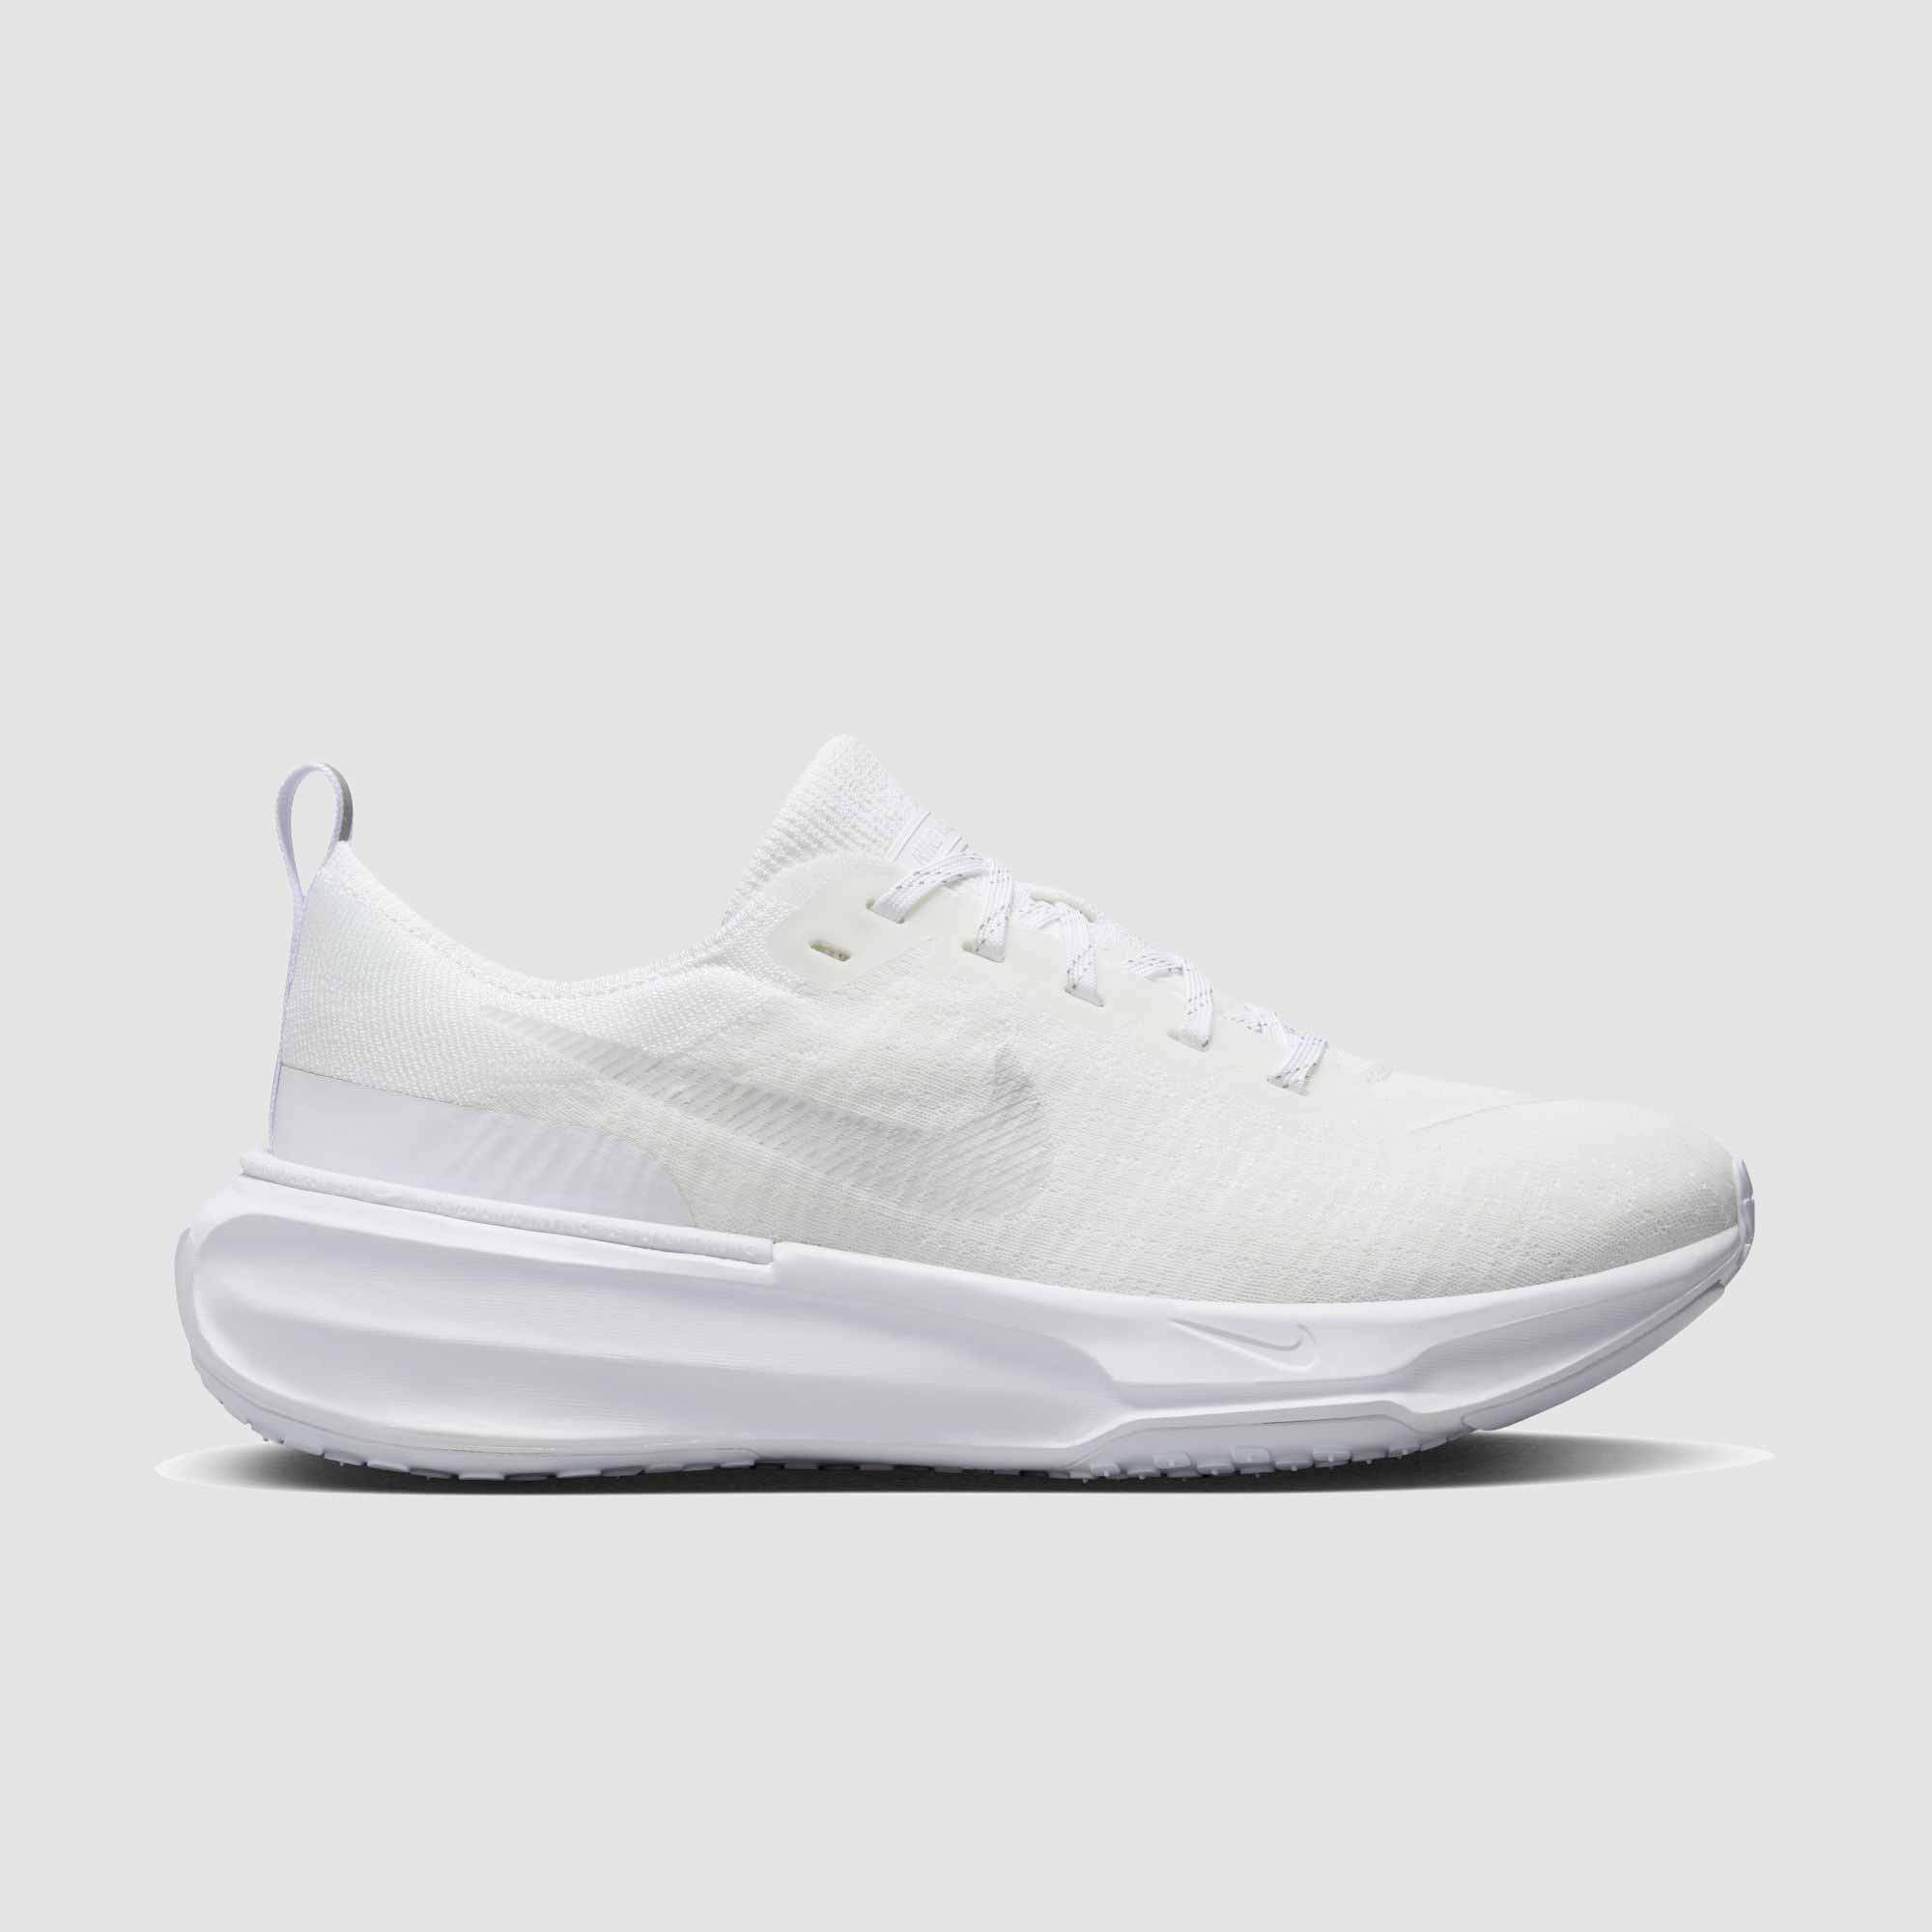 Nike Womens Invincible 3 Running Shoes